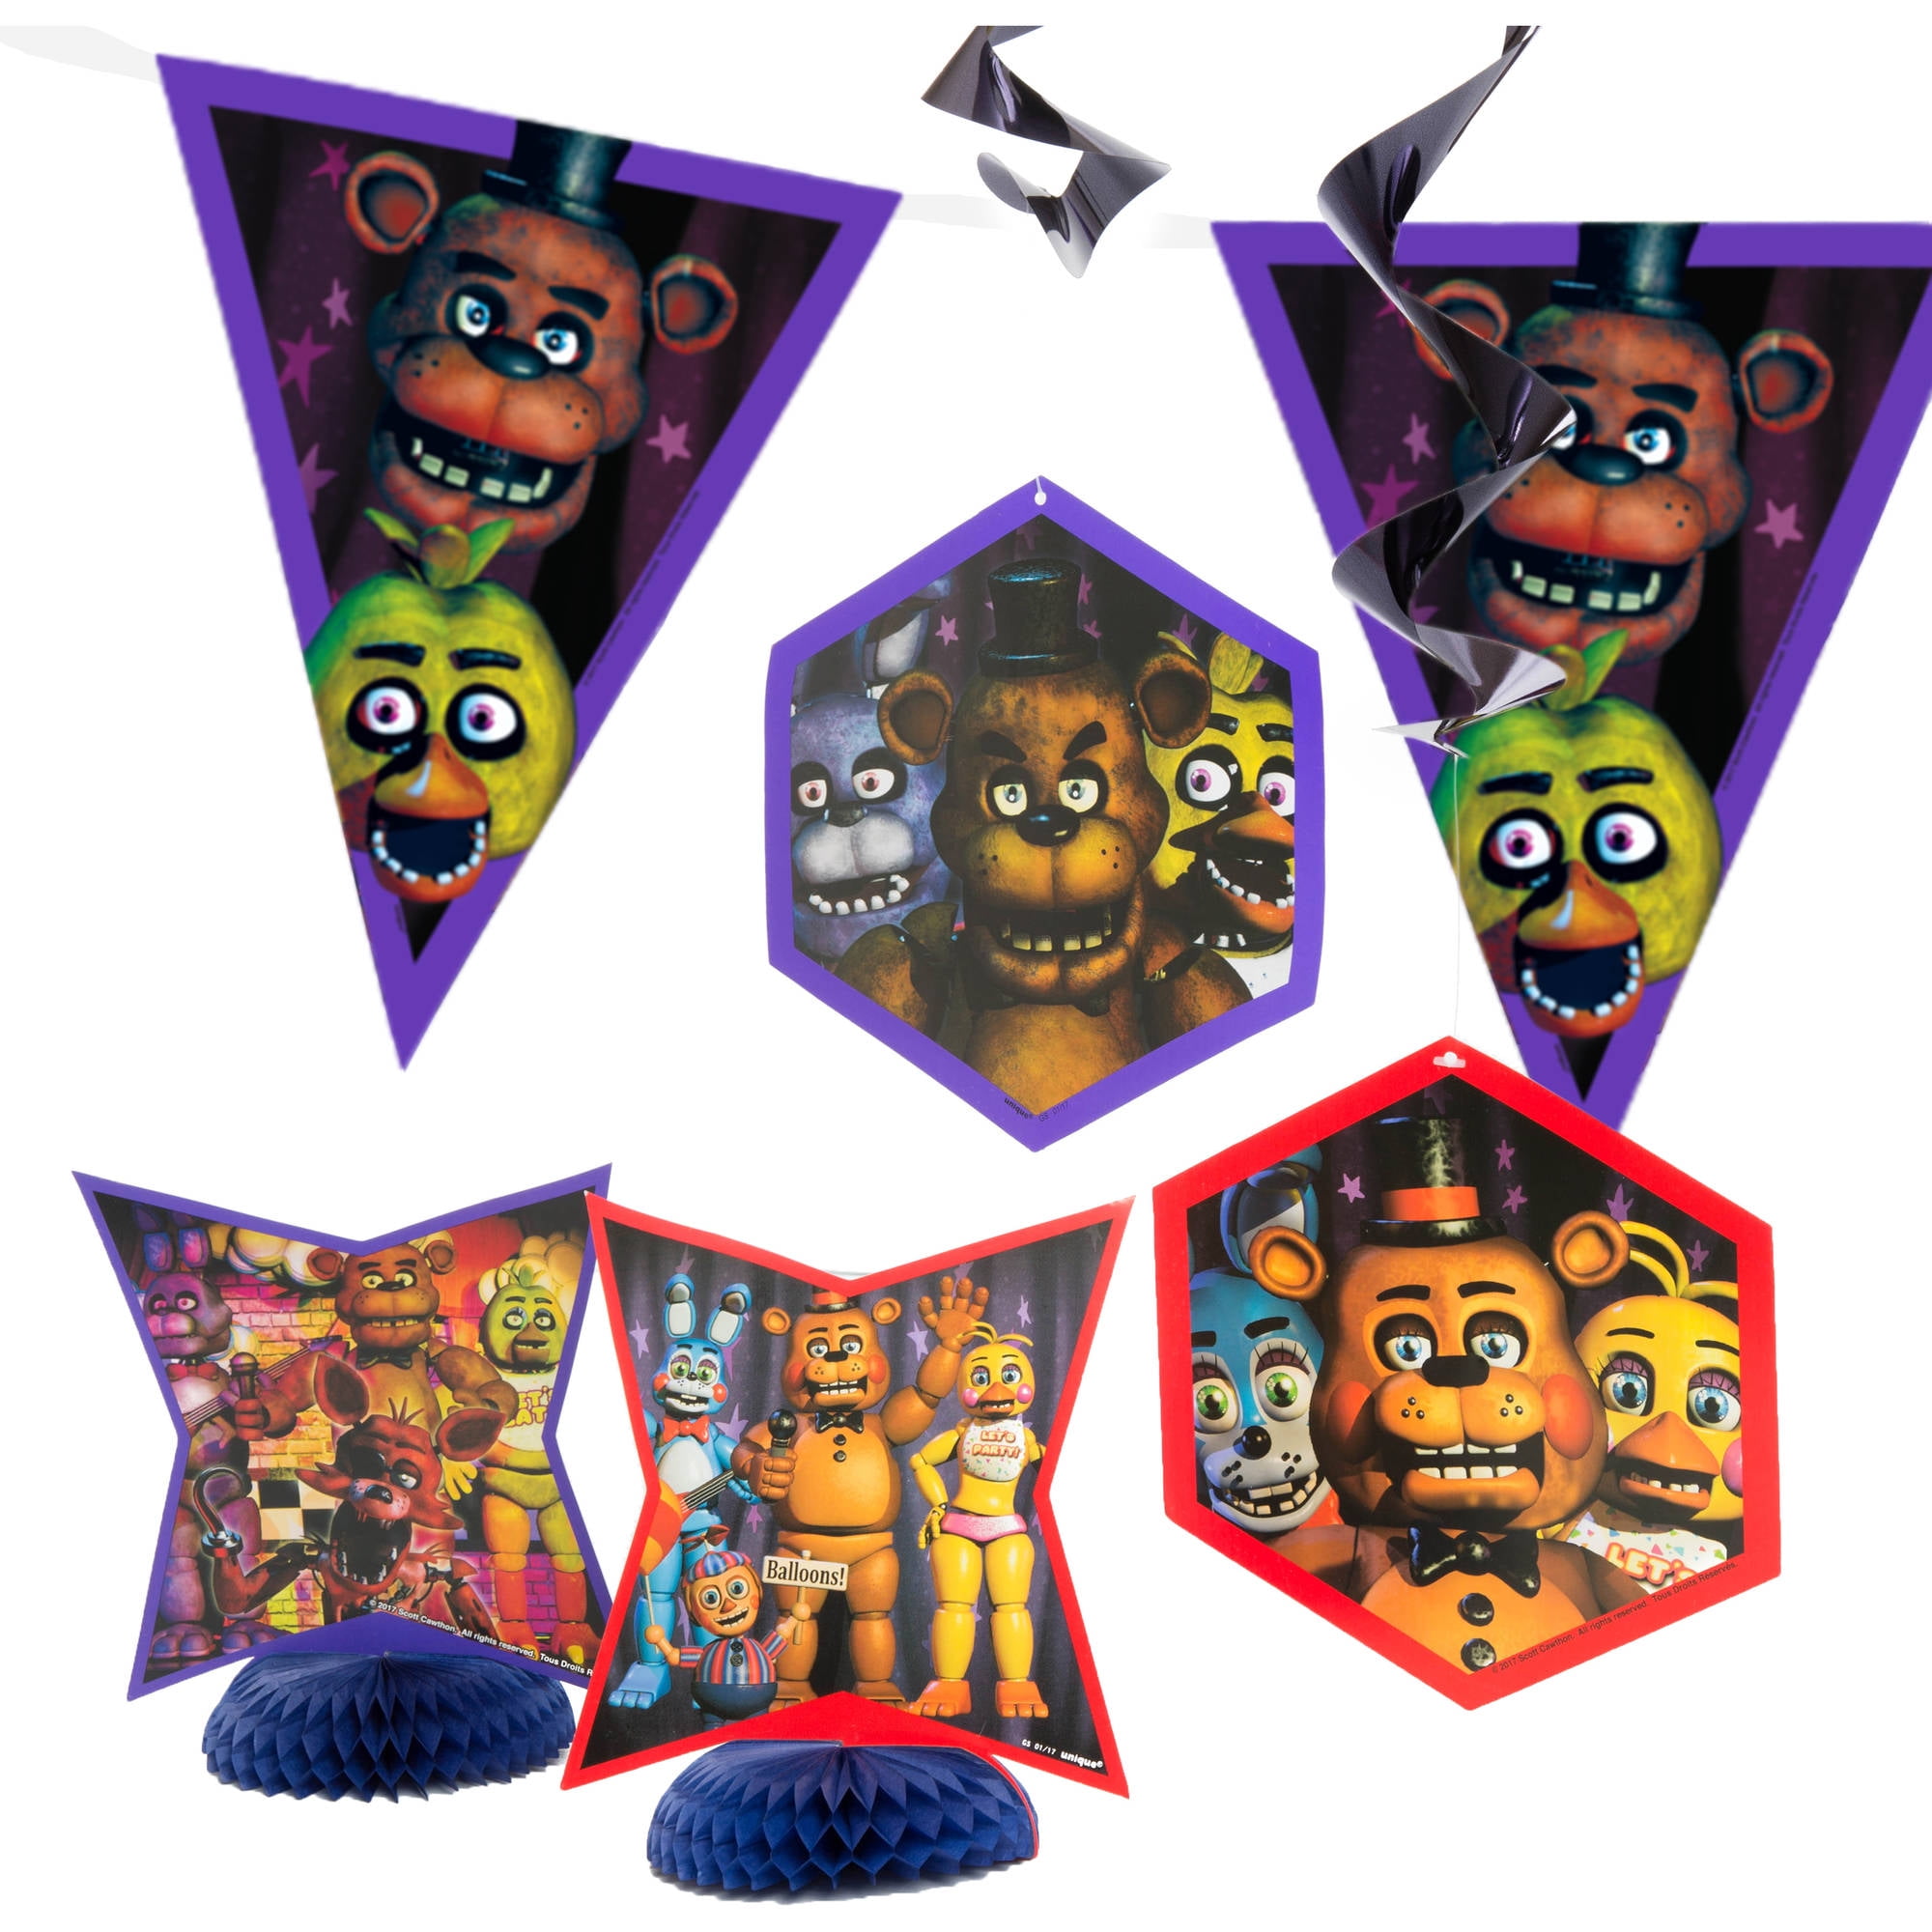 70pcs Fanf Party Favors Five Nights at Freddy Party Supplies, 8pcs Button Pins 12pcs Keyrings, 50 Stickers for Kid's Birthday Decorations